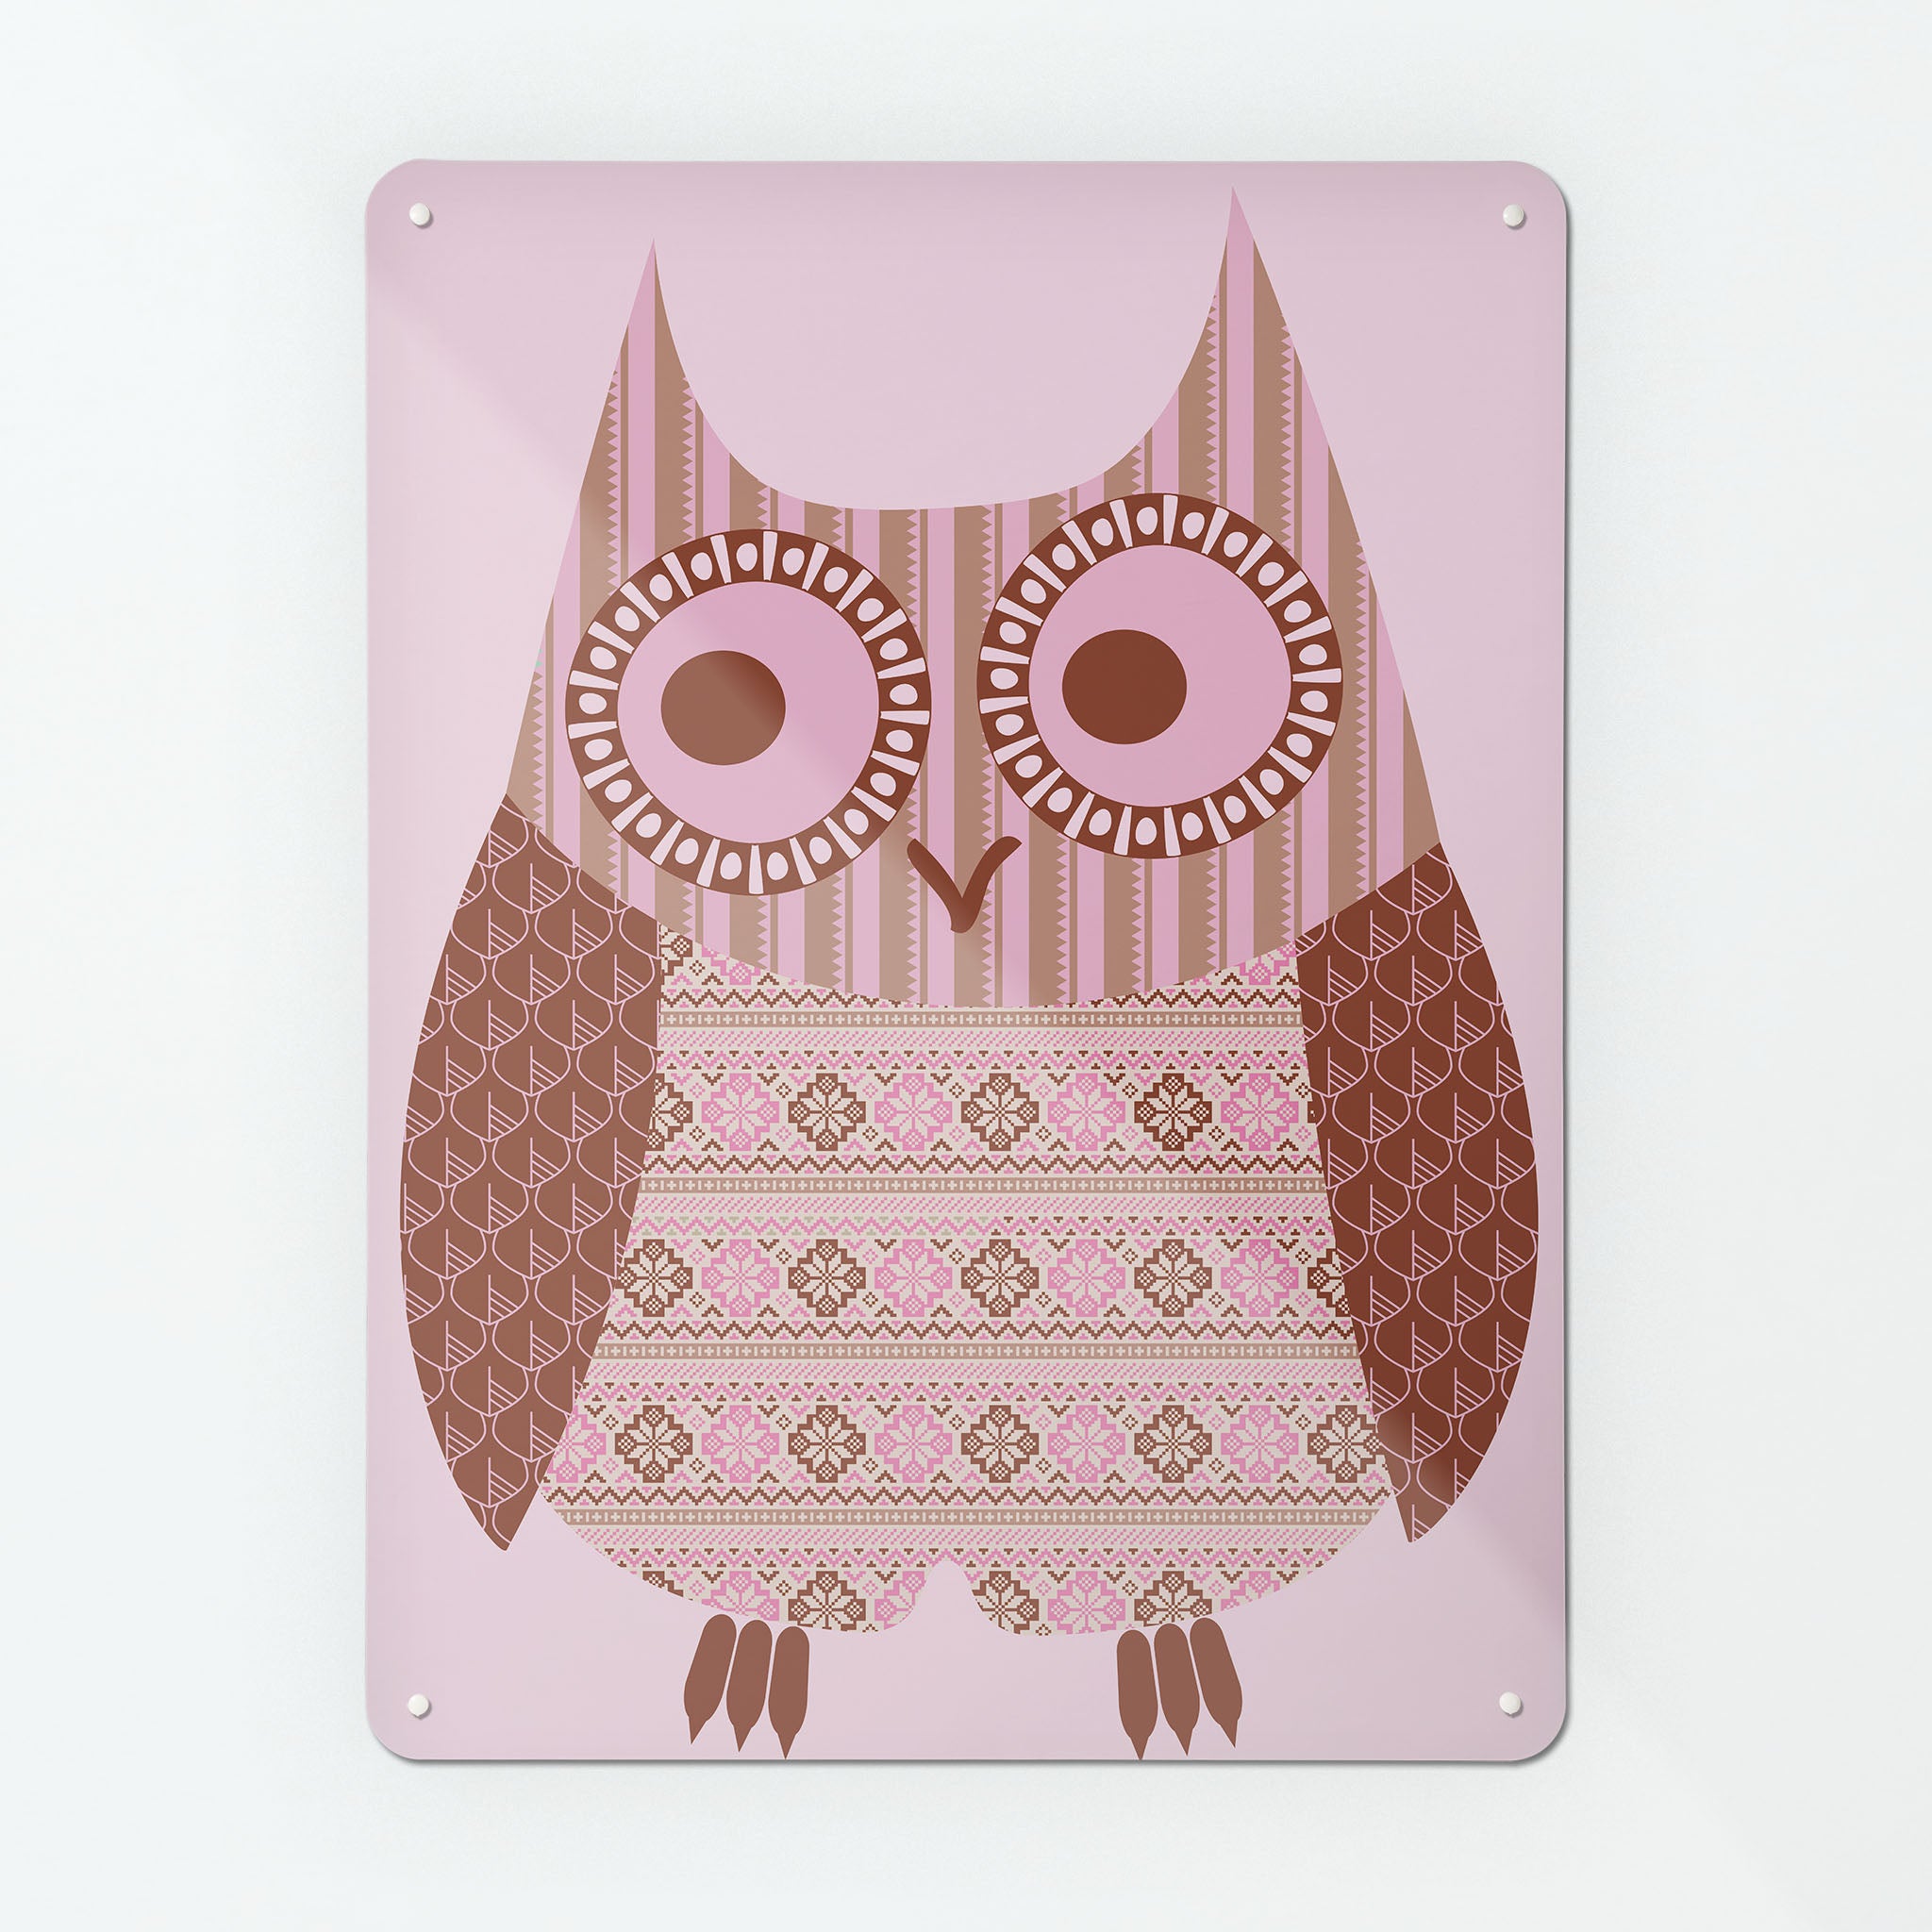 The corner detail of a Fair Isle Owl pink and brown magnetic board to show it’s high gloss surface